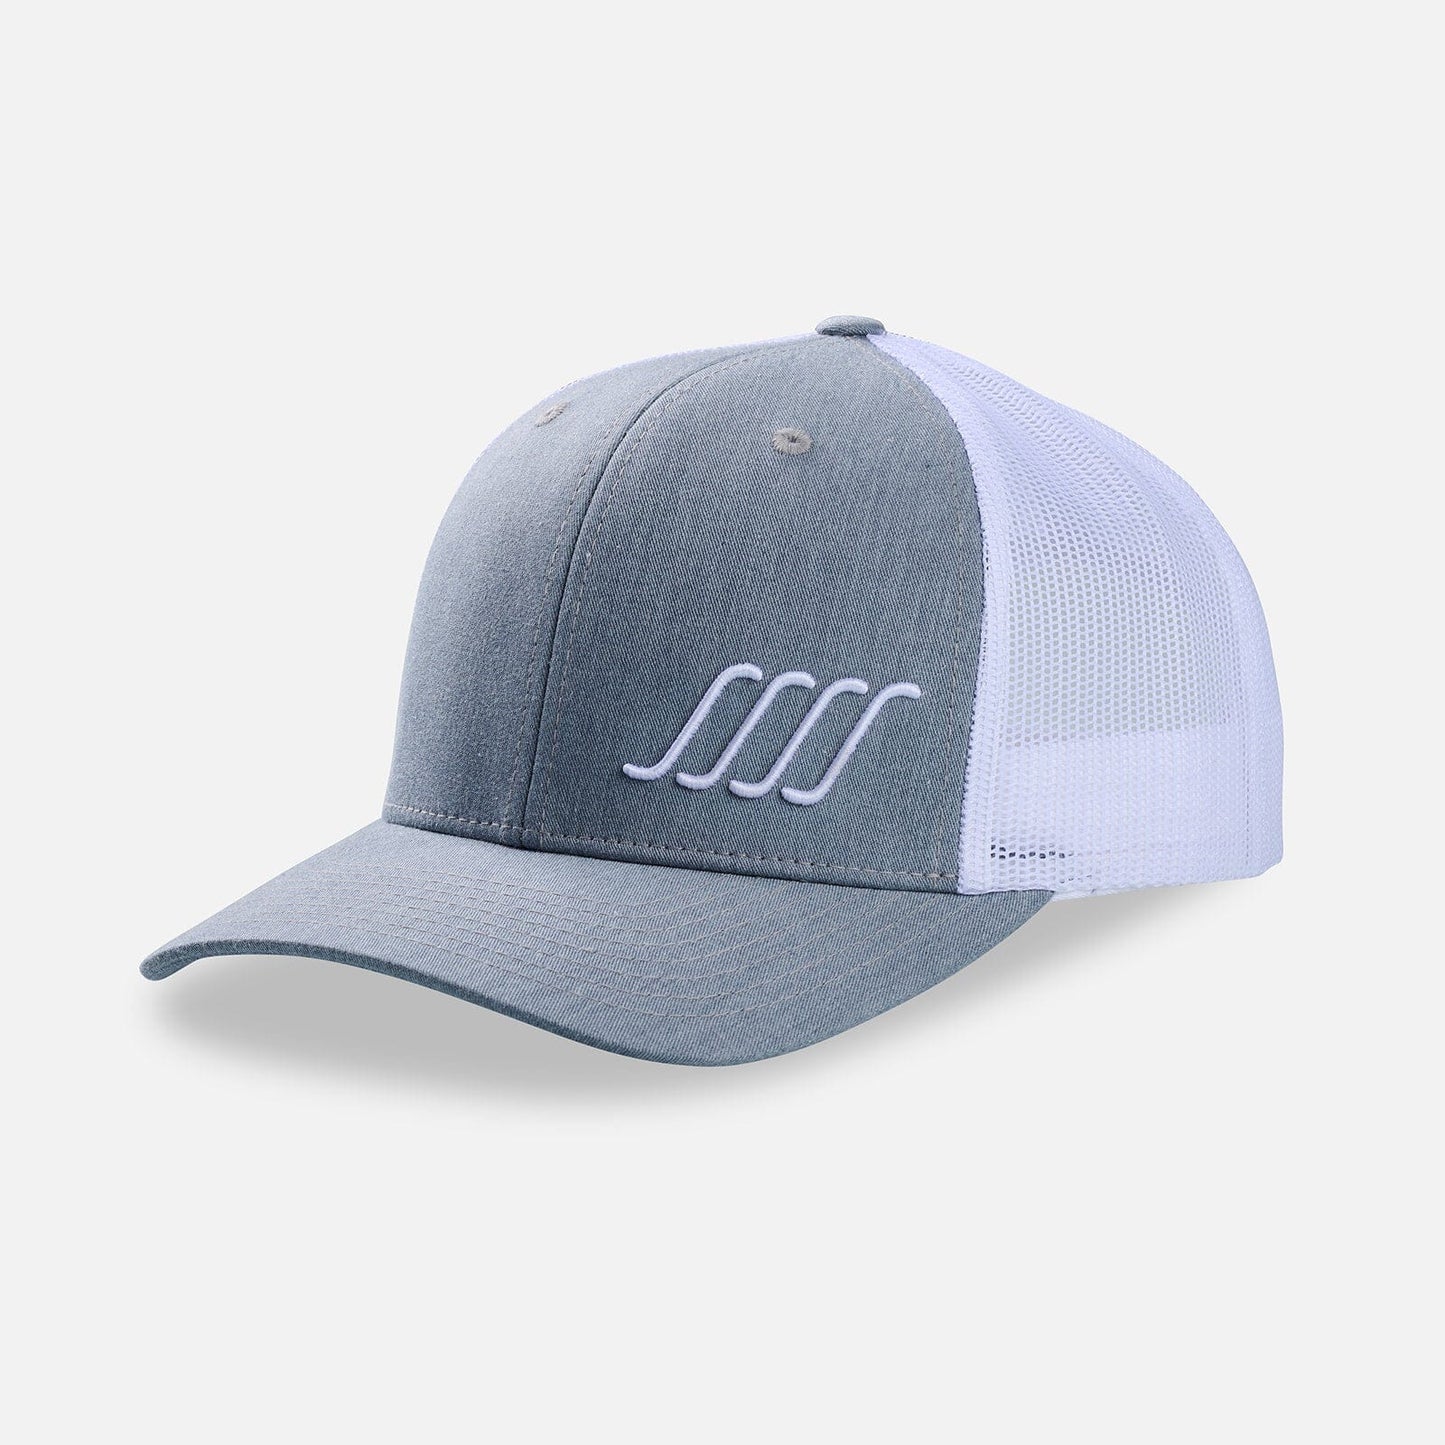 South Swell SSSS Embroidered Trucker Hat Hats SOUTH SWELL Heather Grey / White 